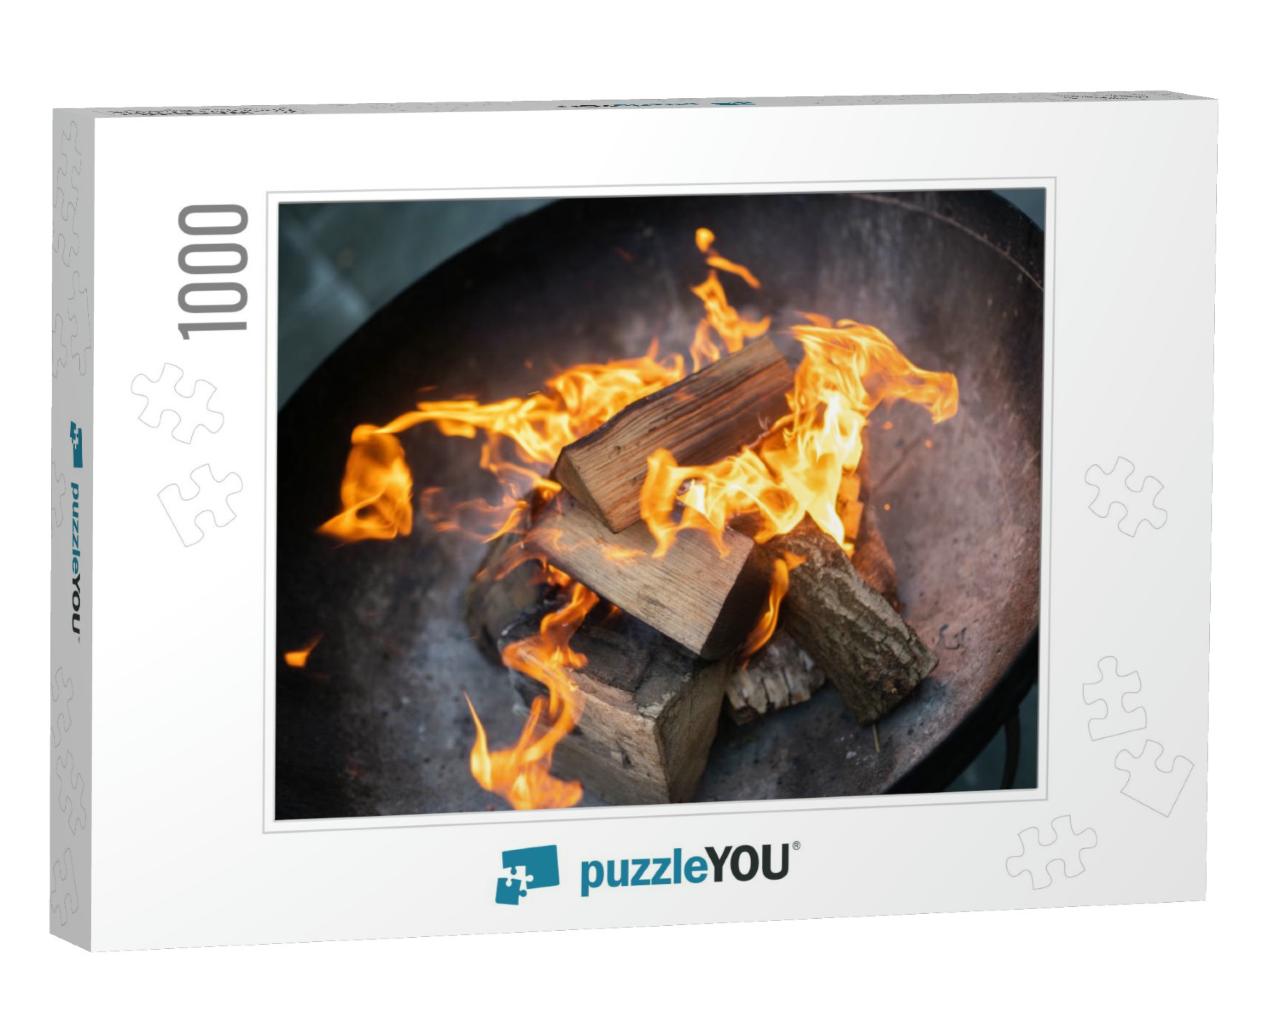 Outdoor Log Burning Fire in Black Metal Fire Pit. Chopped... Jigsaw Puzzle with 1000 pieces